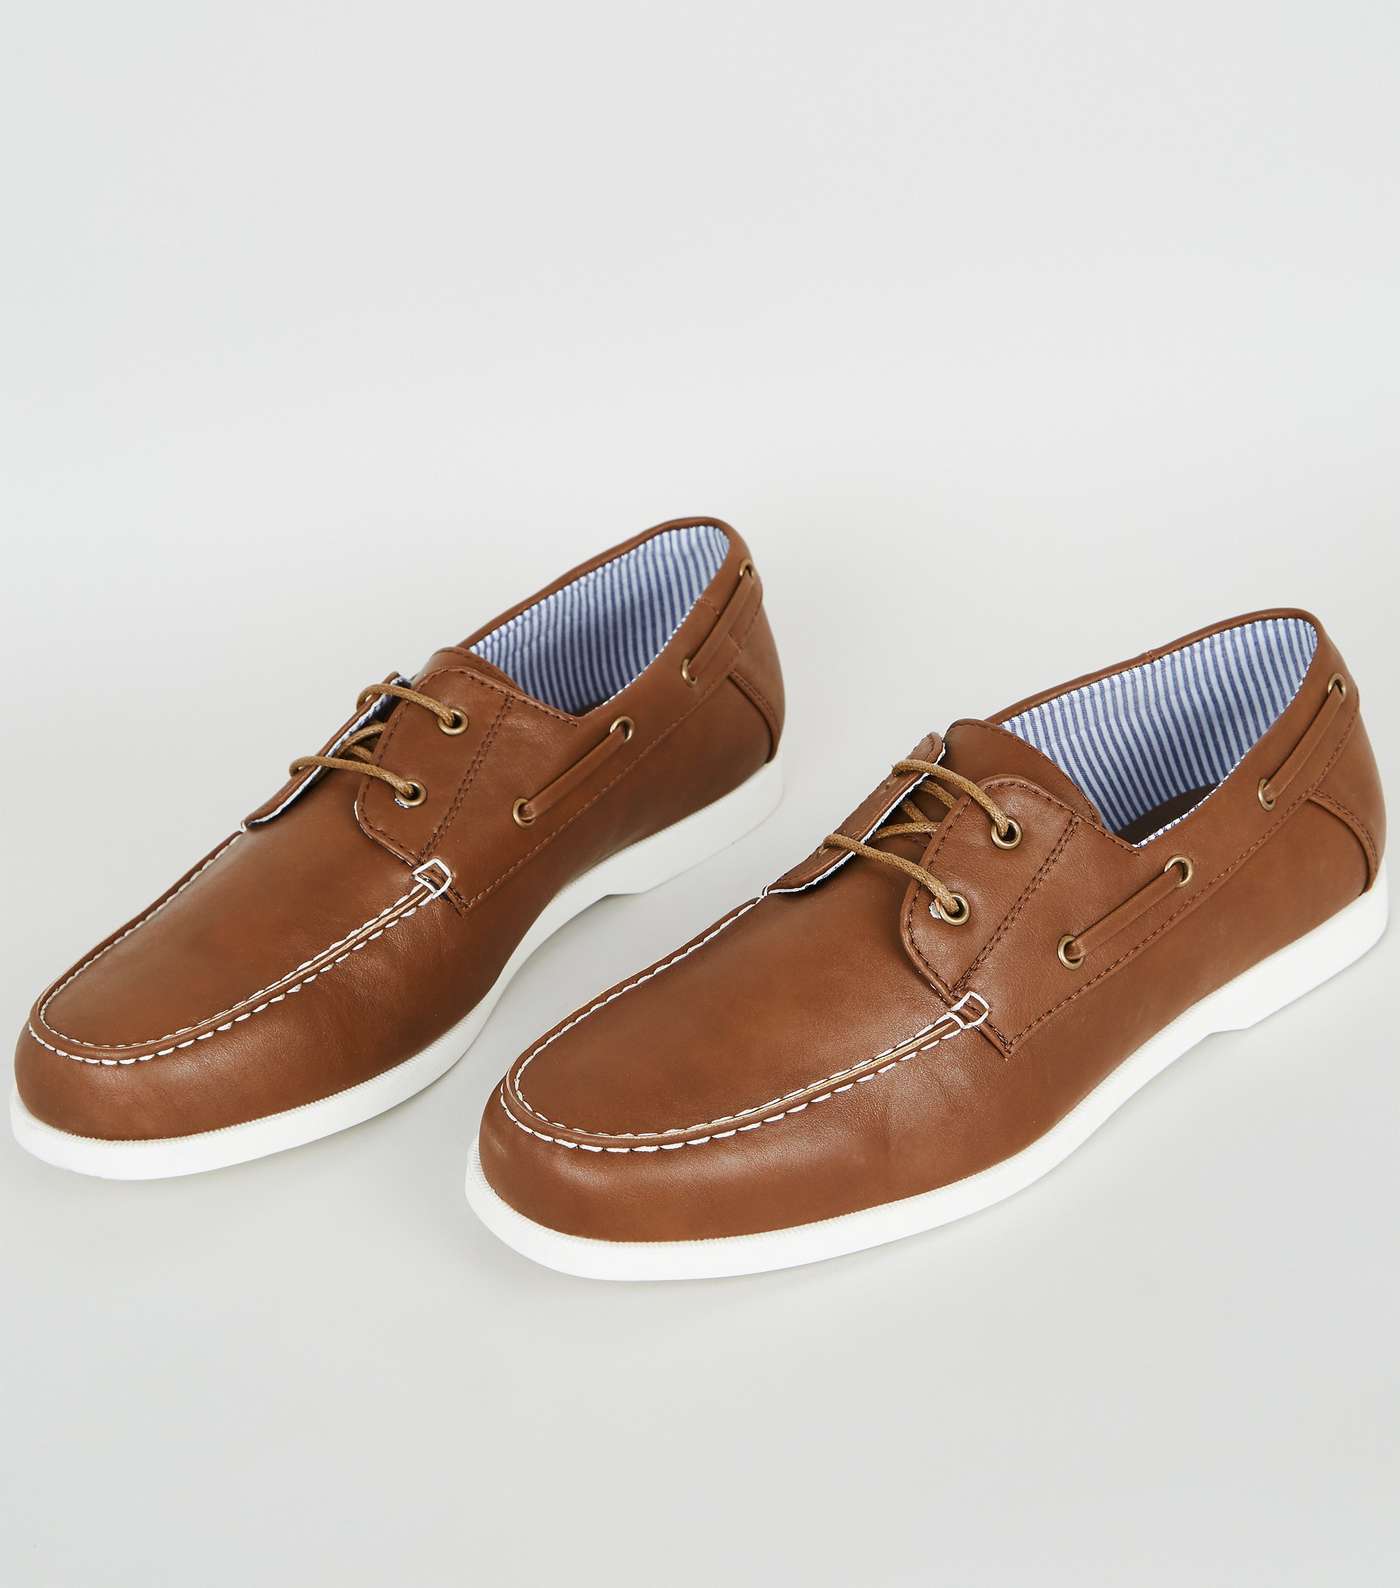 Dark Brown Leather-Look Boat Shoes Image 3